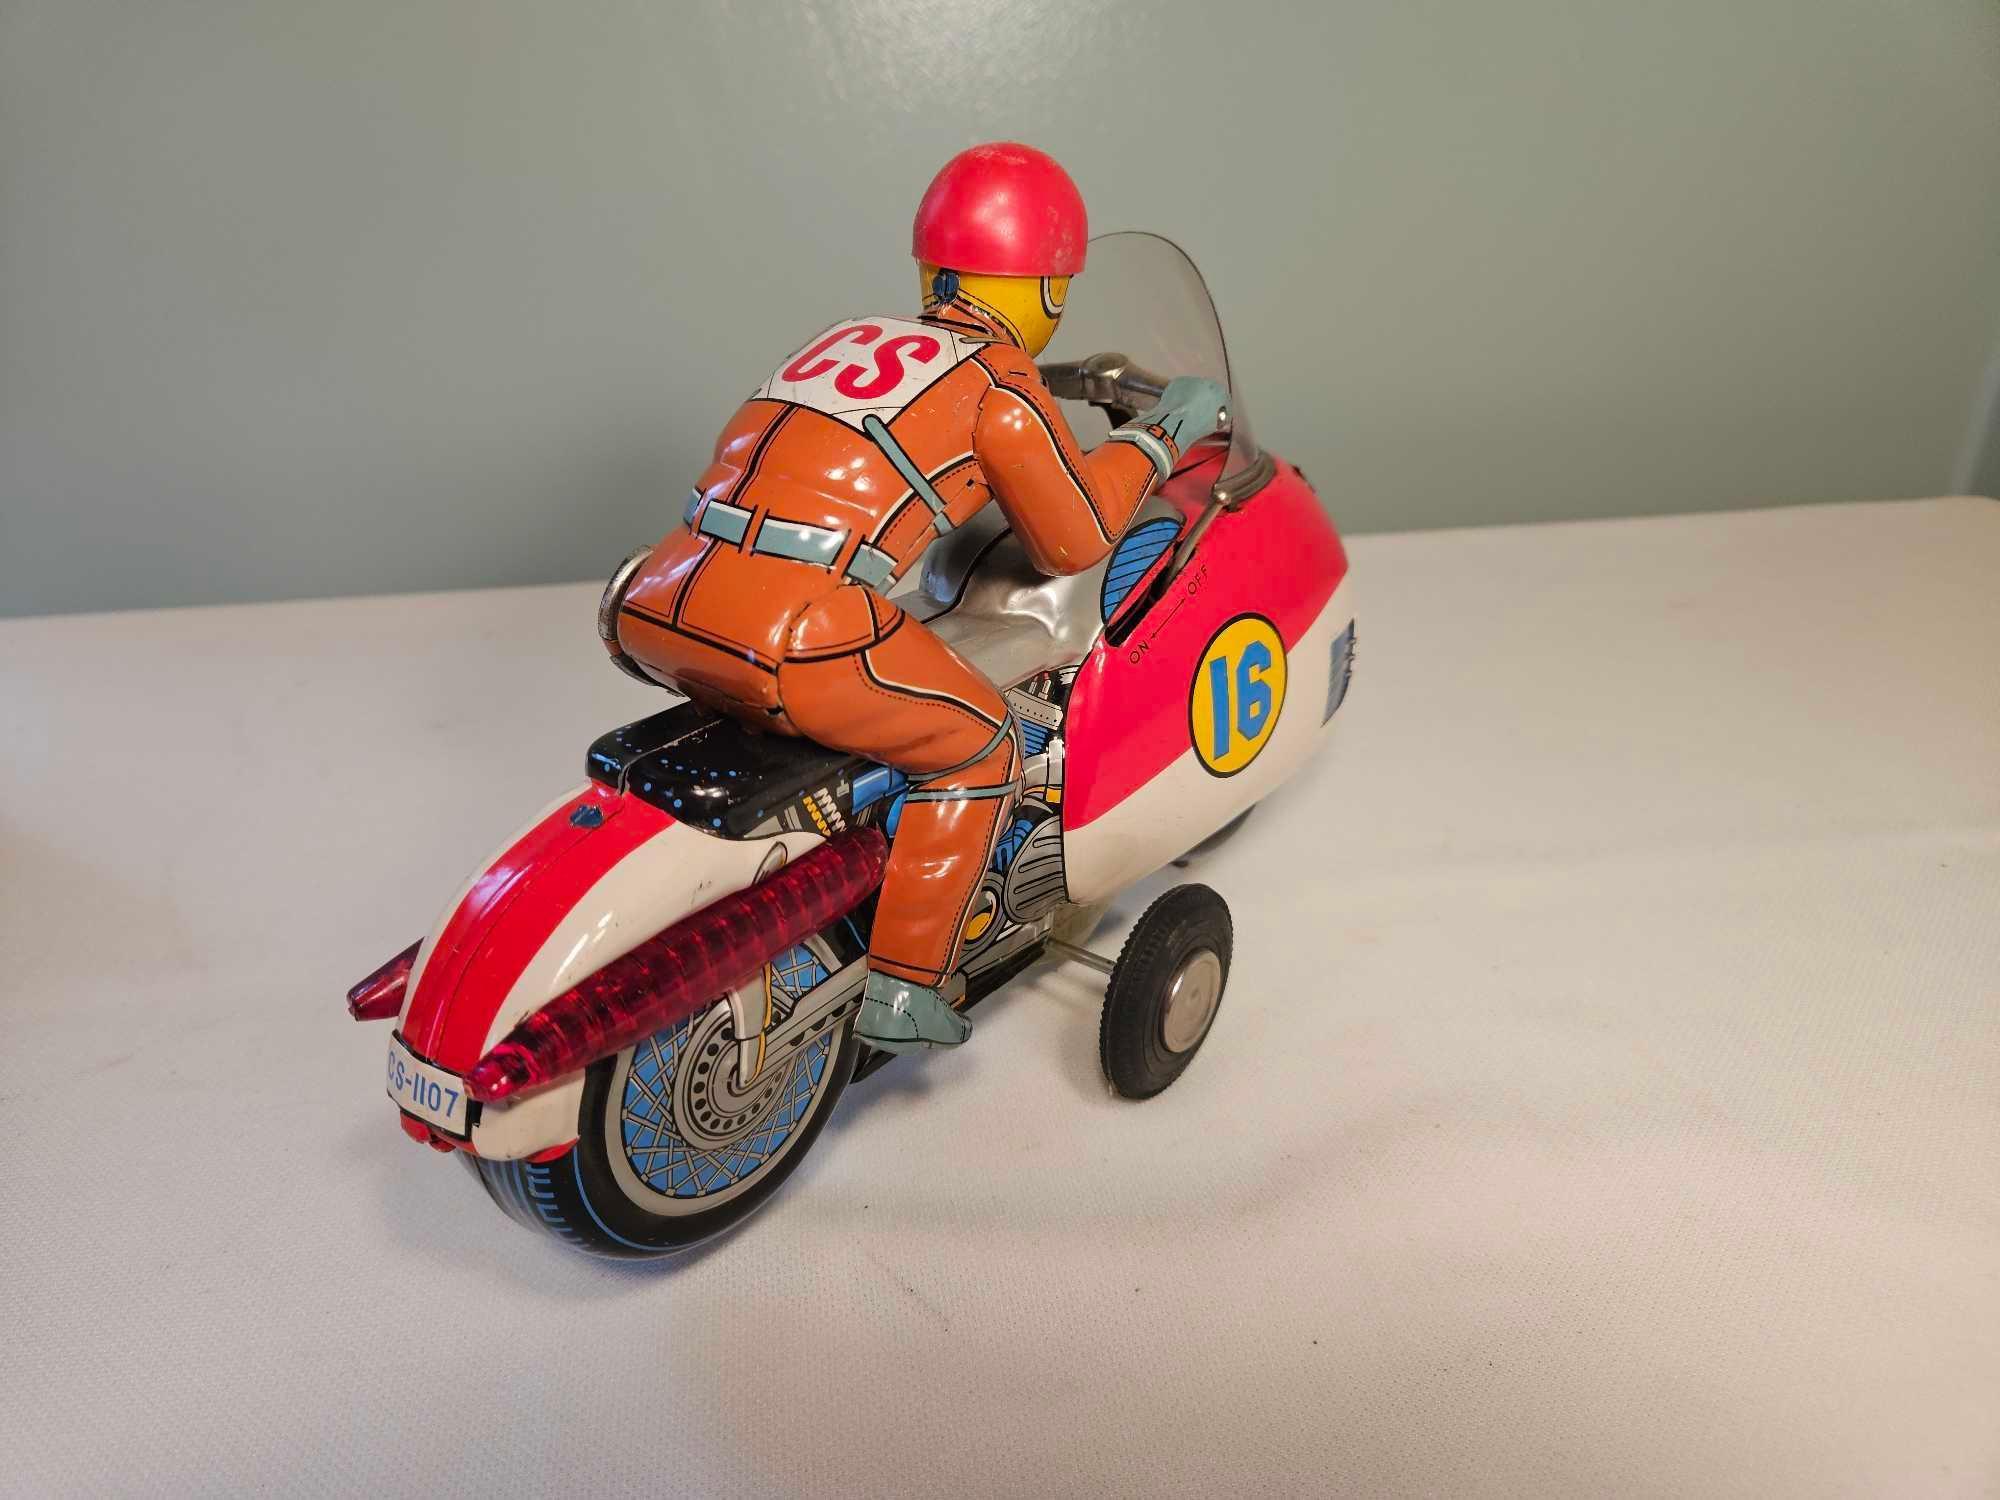 Cragstan Battery Operated Daredevil Stunt Motorcycle